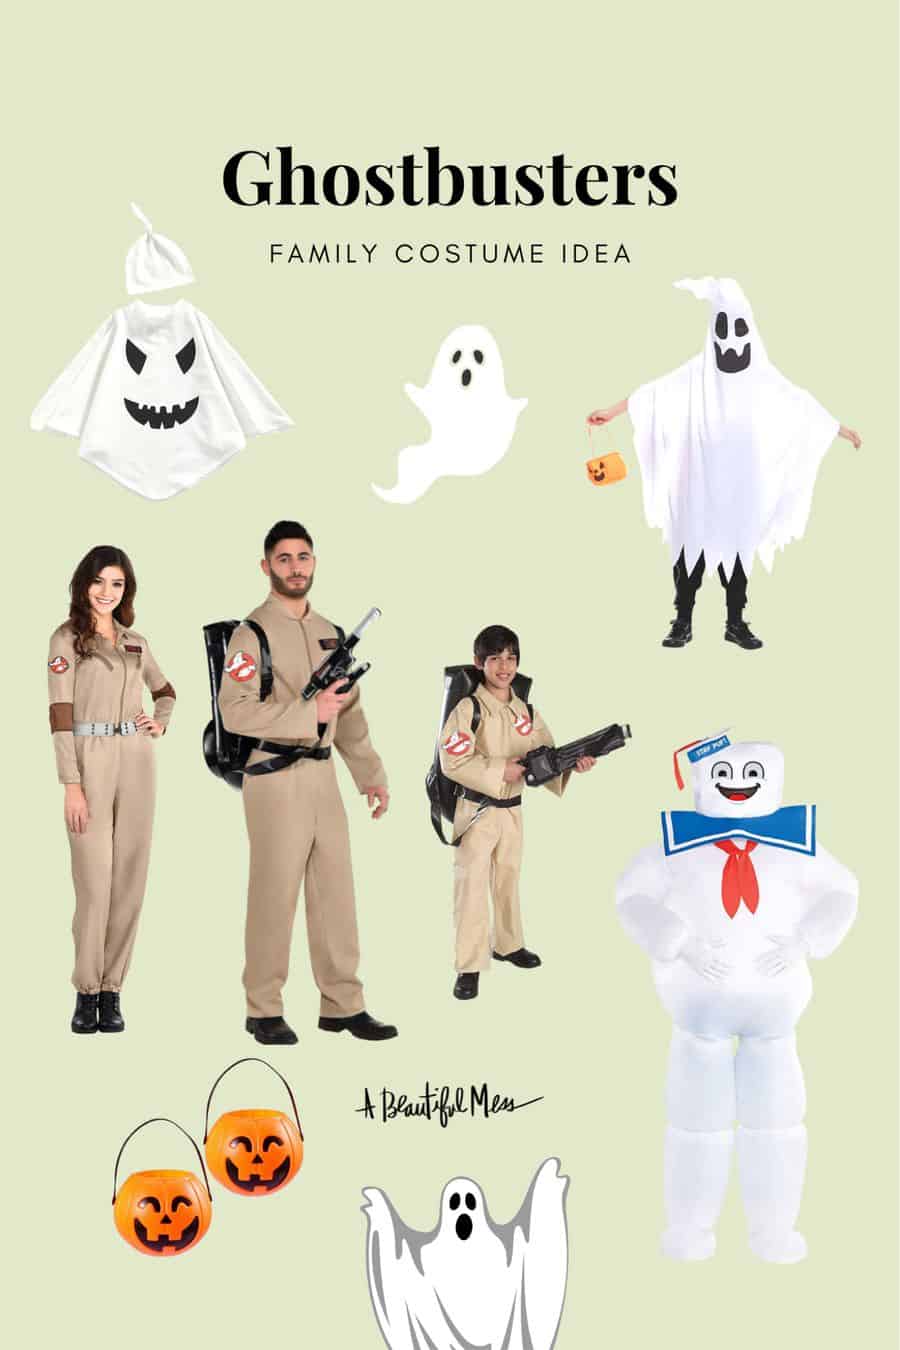 Family halloween costume ideas from Ghostbusters